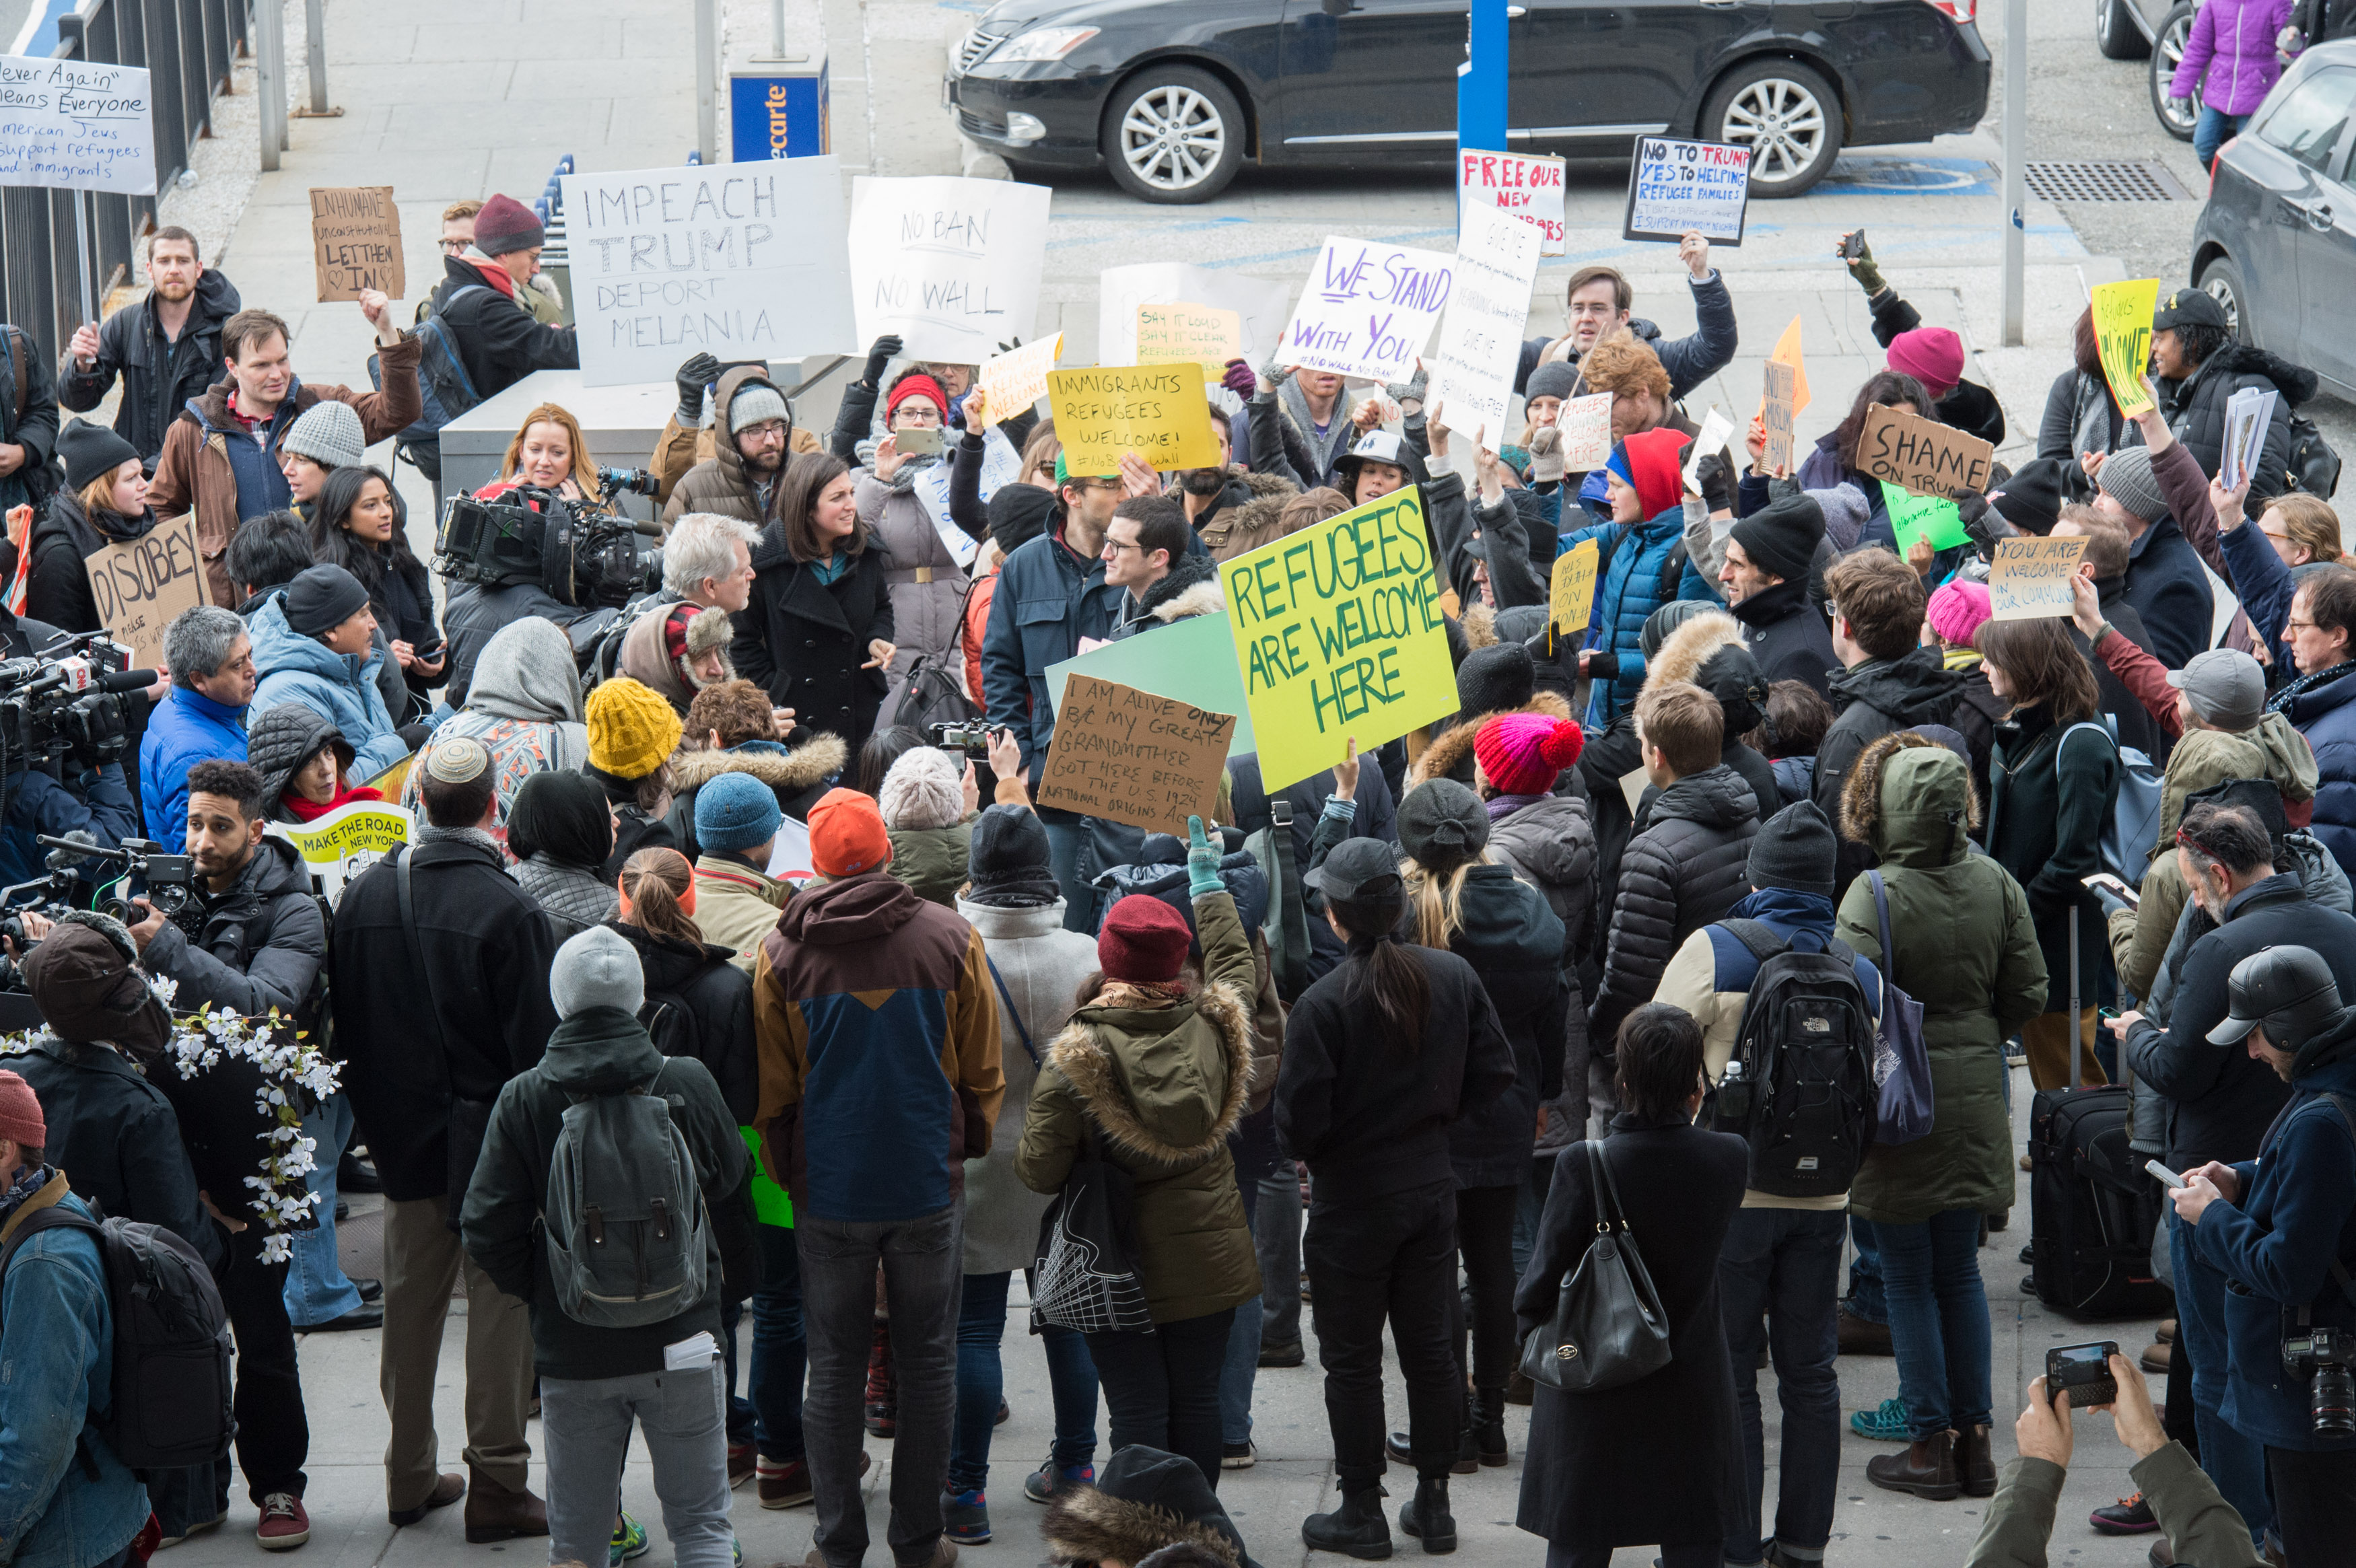 Protesters gather at JFK International Airport's Terminal 4 to demonstrate against Trump's executive order, on Jan. 28, 2016 in New York. (Bryan R. Smith—AFP/Getty Images)